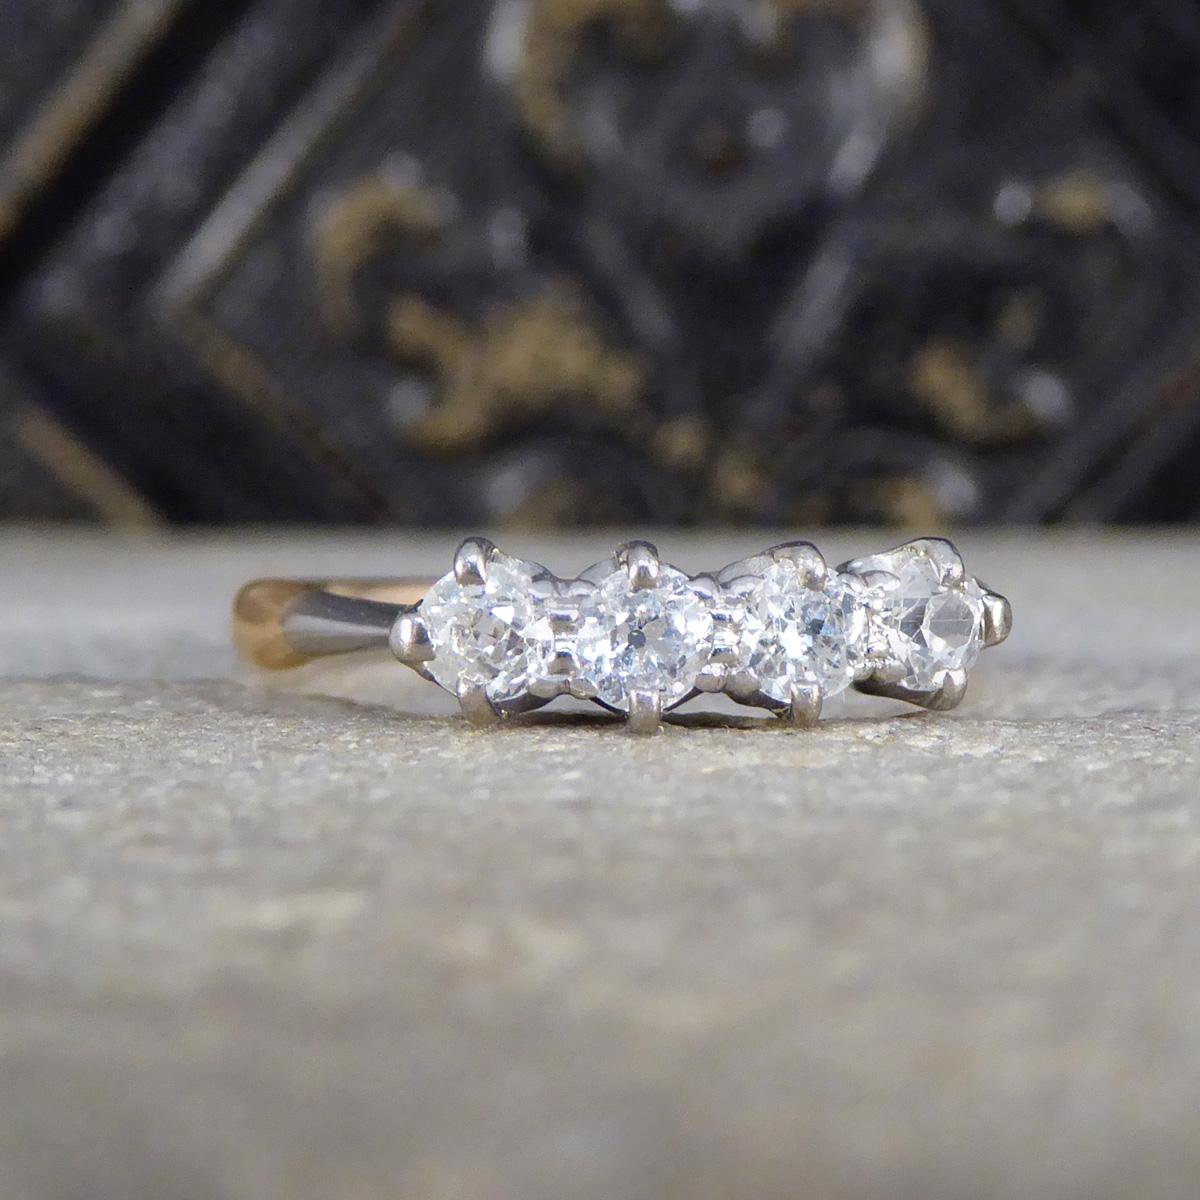 Step back in time with this magnificent Late Victorian Old Cut Diamond four stone ring, a true treasure from an era renowned for its elegance and craftsmanship. Set in luxurious 18ct yellow gold with a white top, this ring features four chunky old